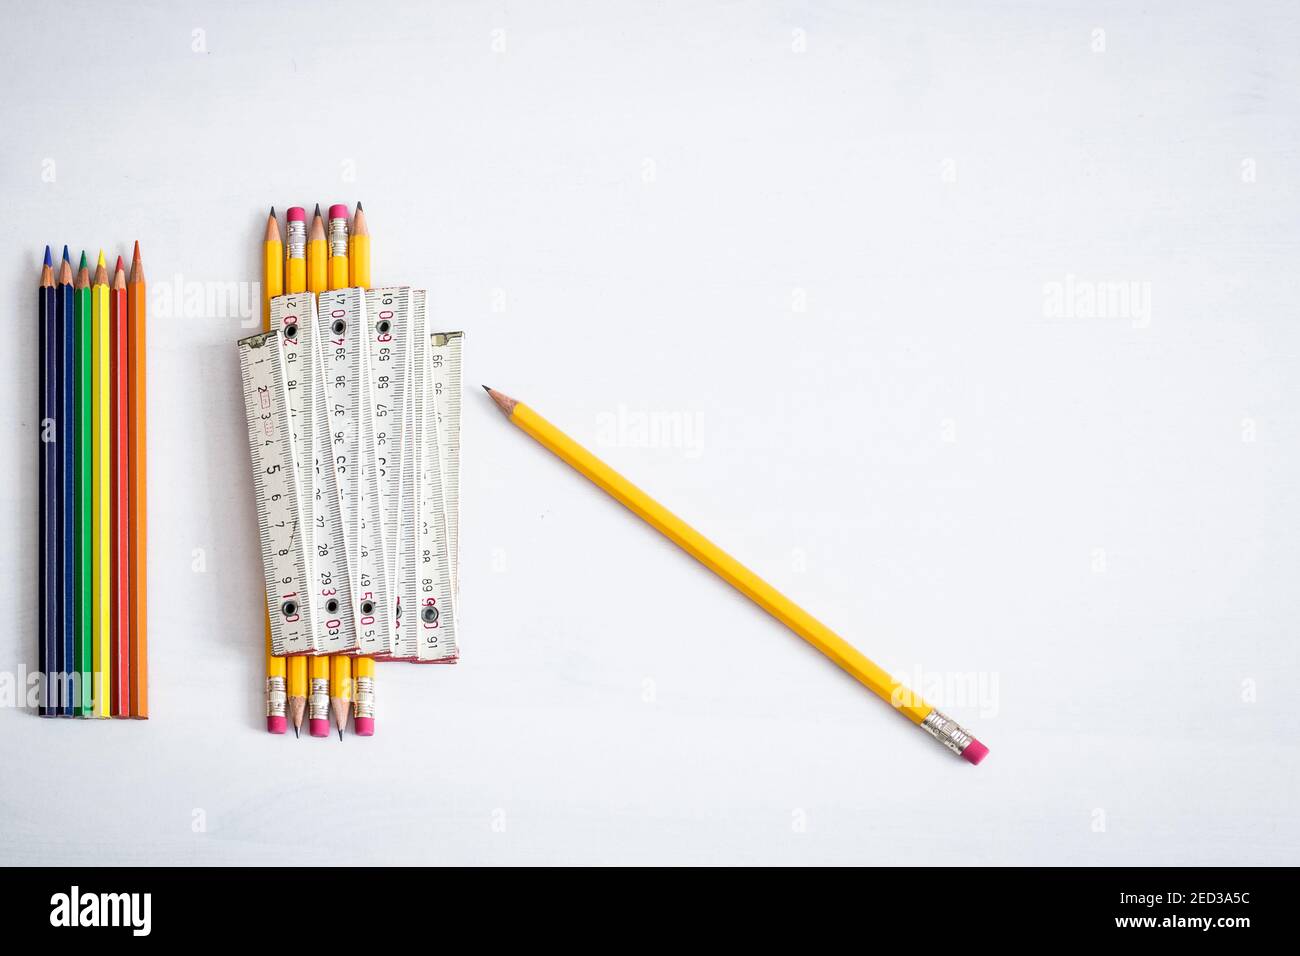 A group of coloured crayons and pencils resting on a white background with one meter indicating the safe distance to keep in enclosed places. Stock Photo